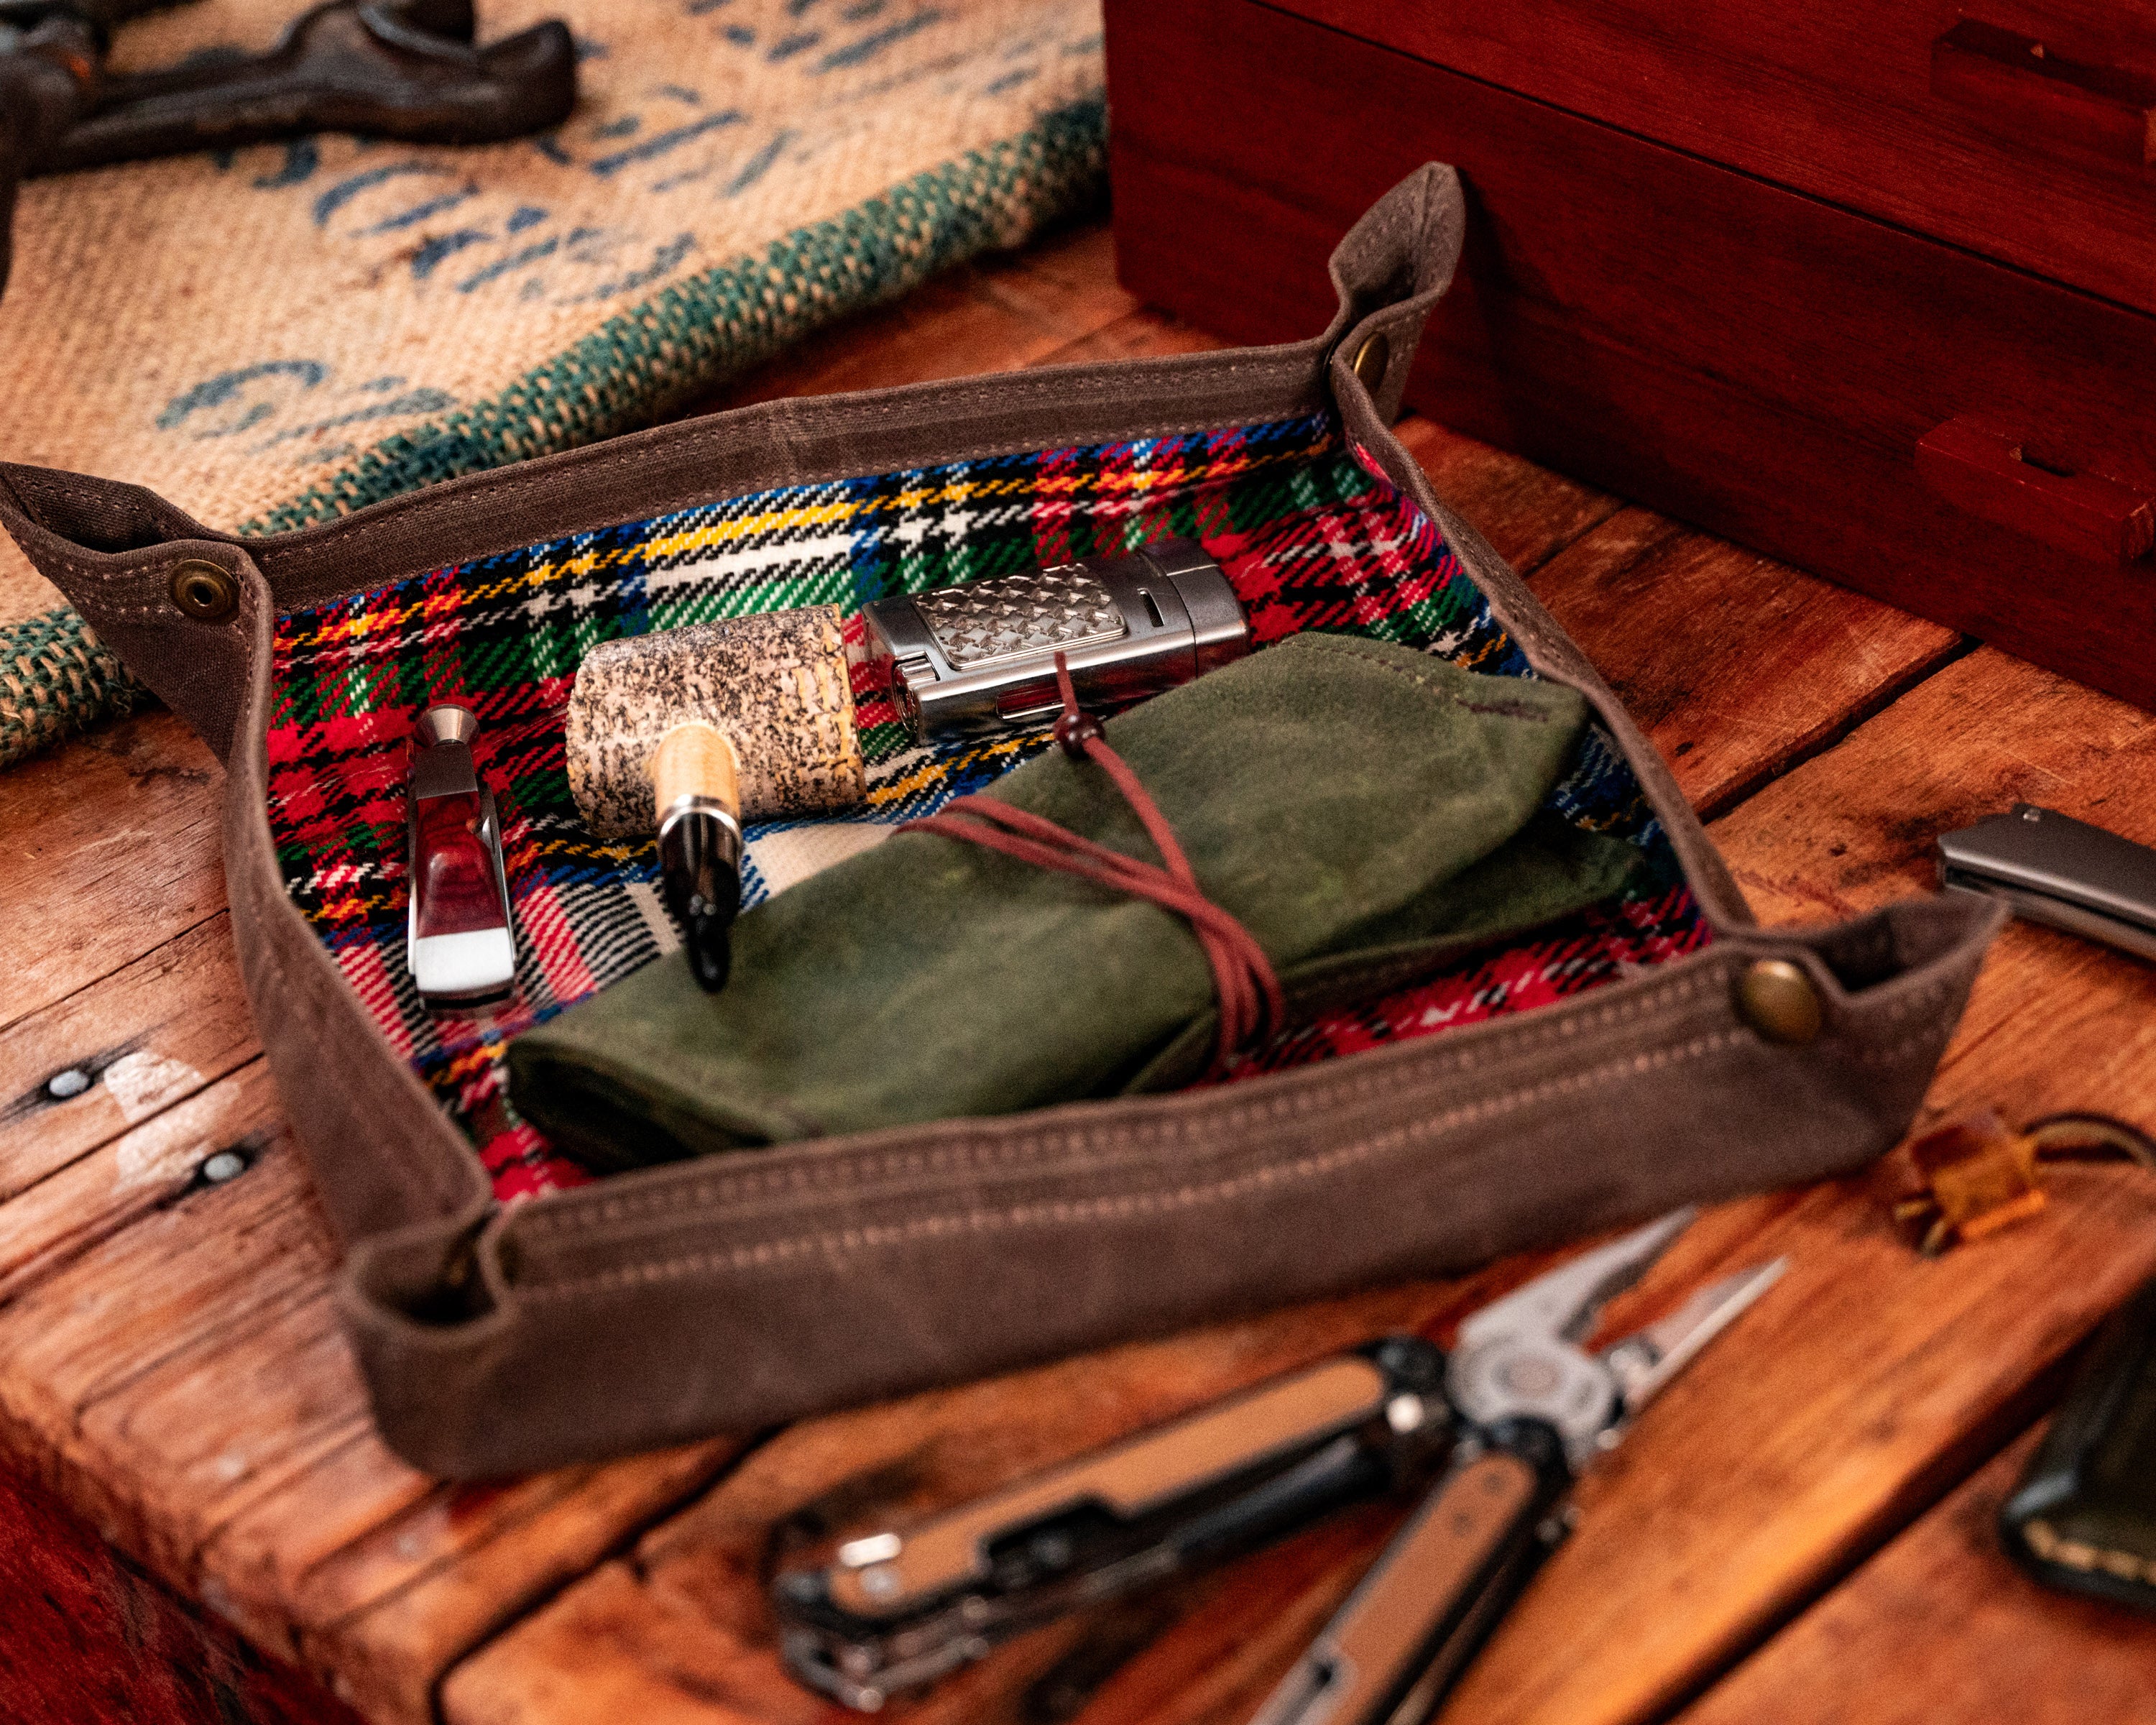 Carry Commission / PNW Bushcraft Vintage Plaid Waxed Canvas Travel Tray sideways view with a smoking pipe and accessories sitting on a wooden surface.